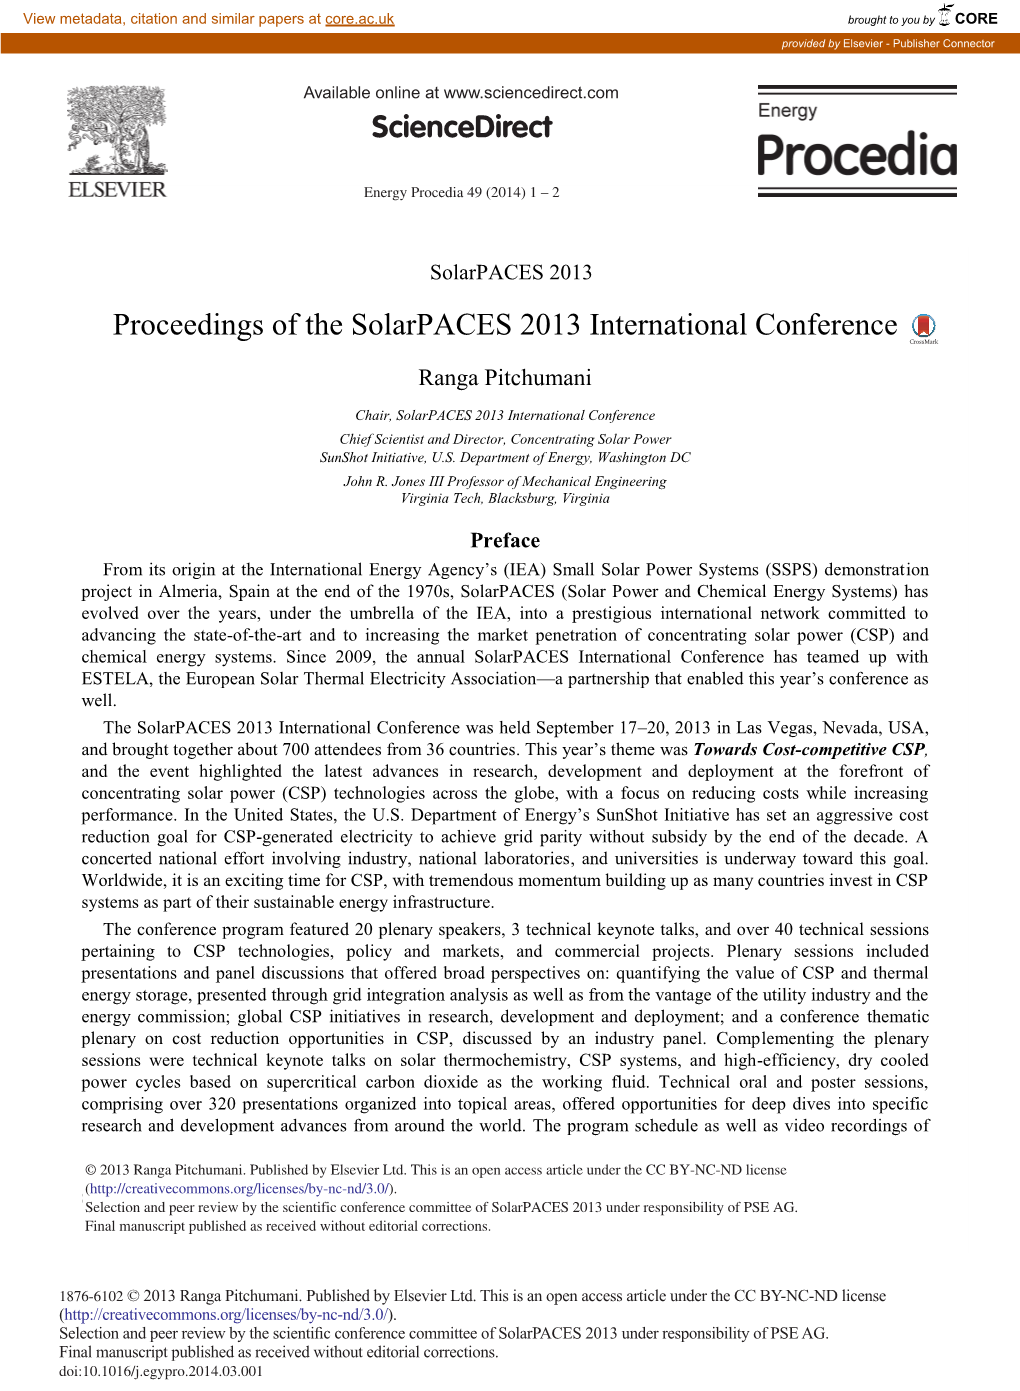 Proceedings of the Solarpaces 2013 International Conference